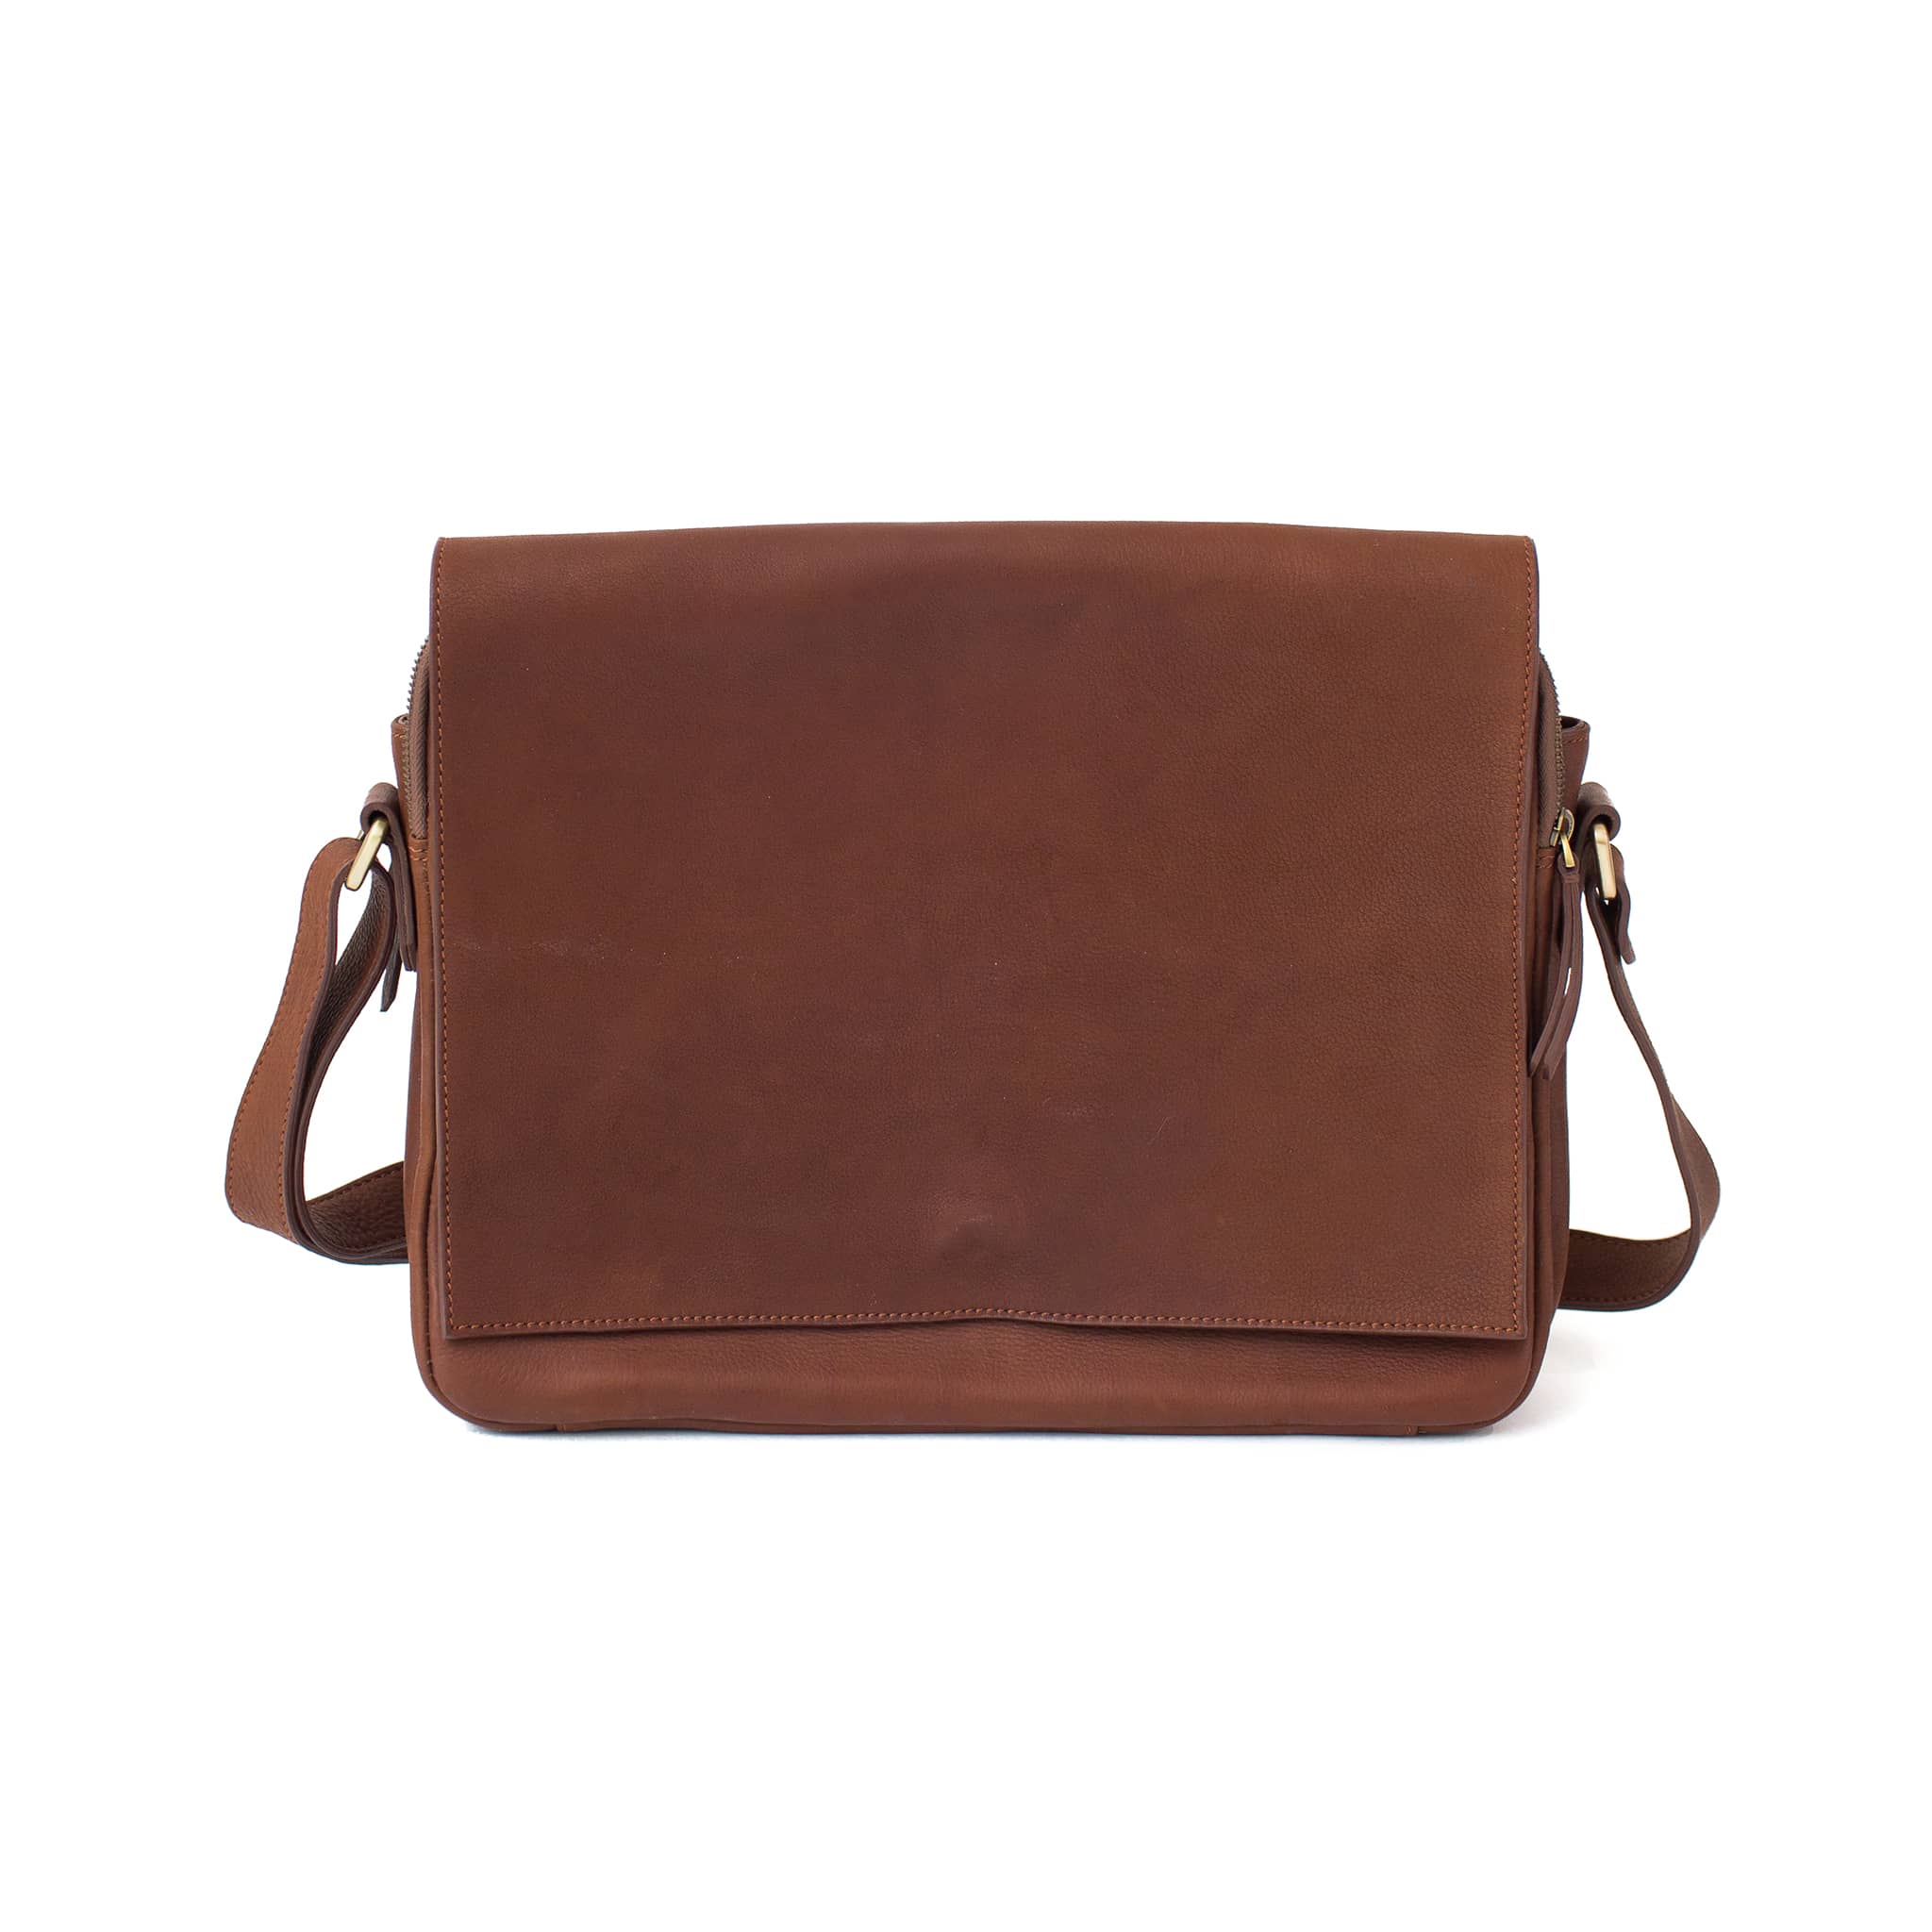 Ford messenger brown walnut raw leather unisex bag in has a minimal, classic style.